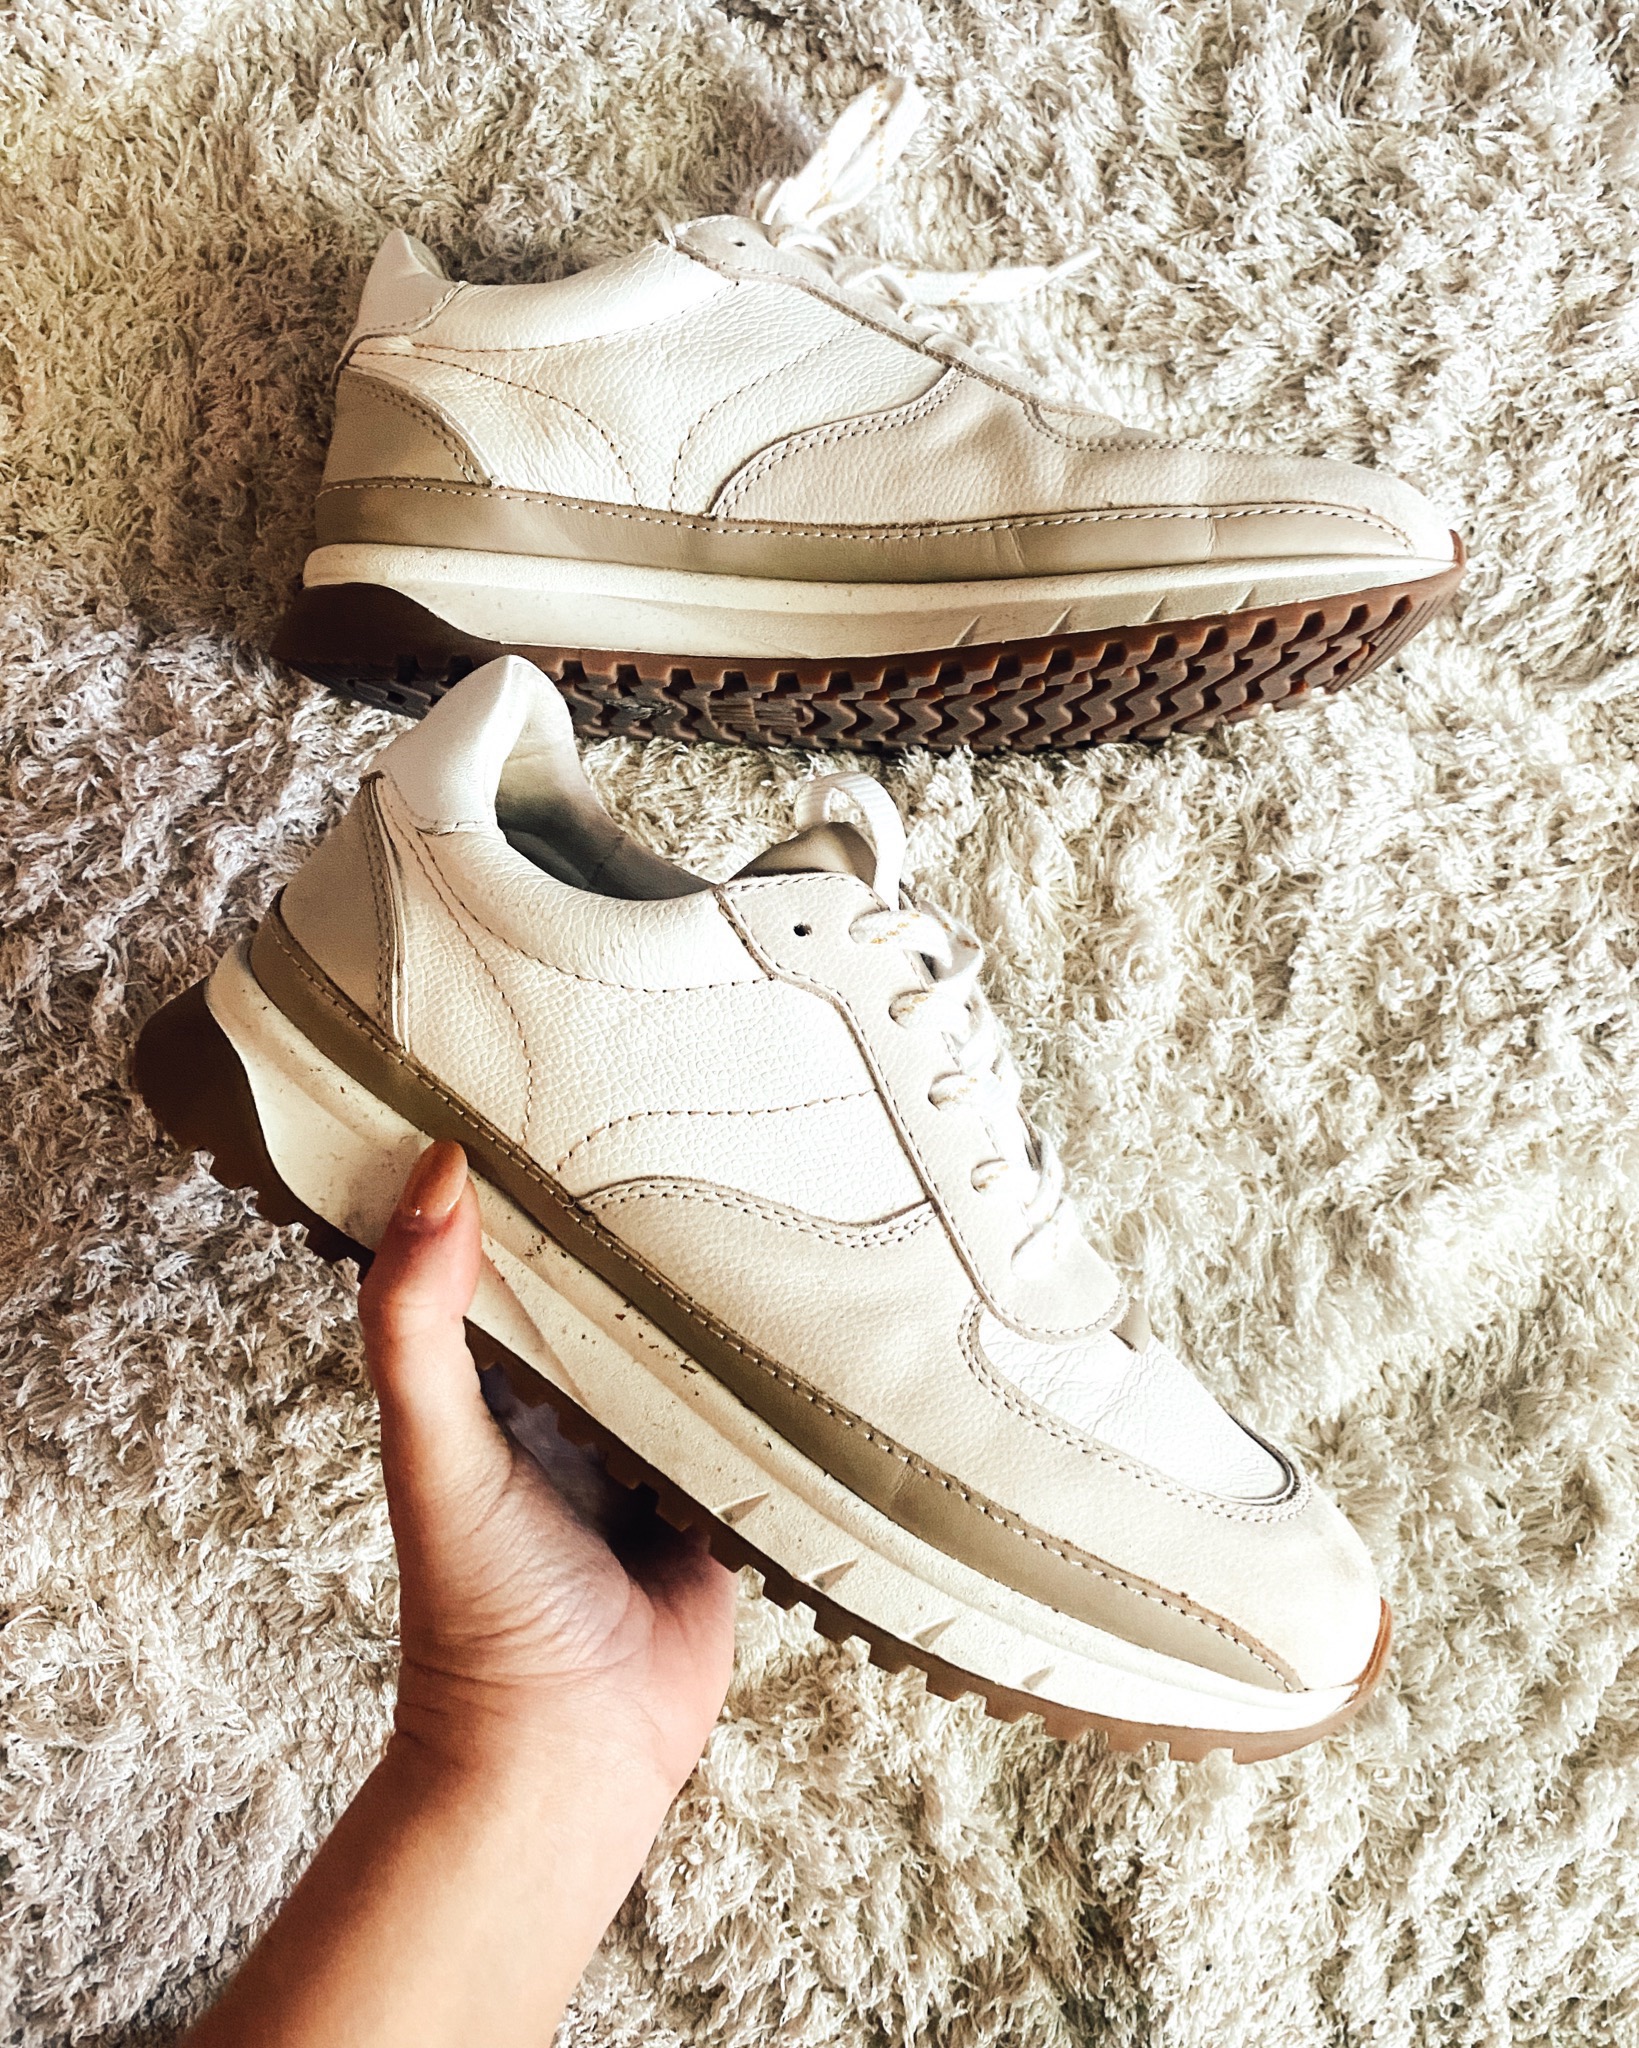 The Fall Madewell Edit, Madewell Kickoff Trainer Sneakers in Leather